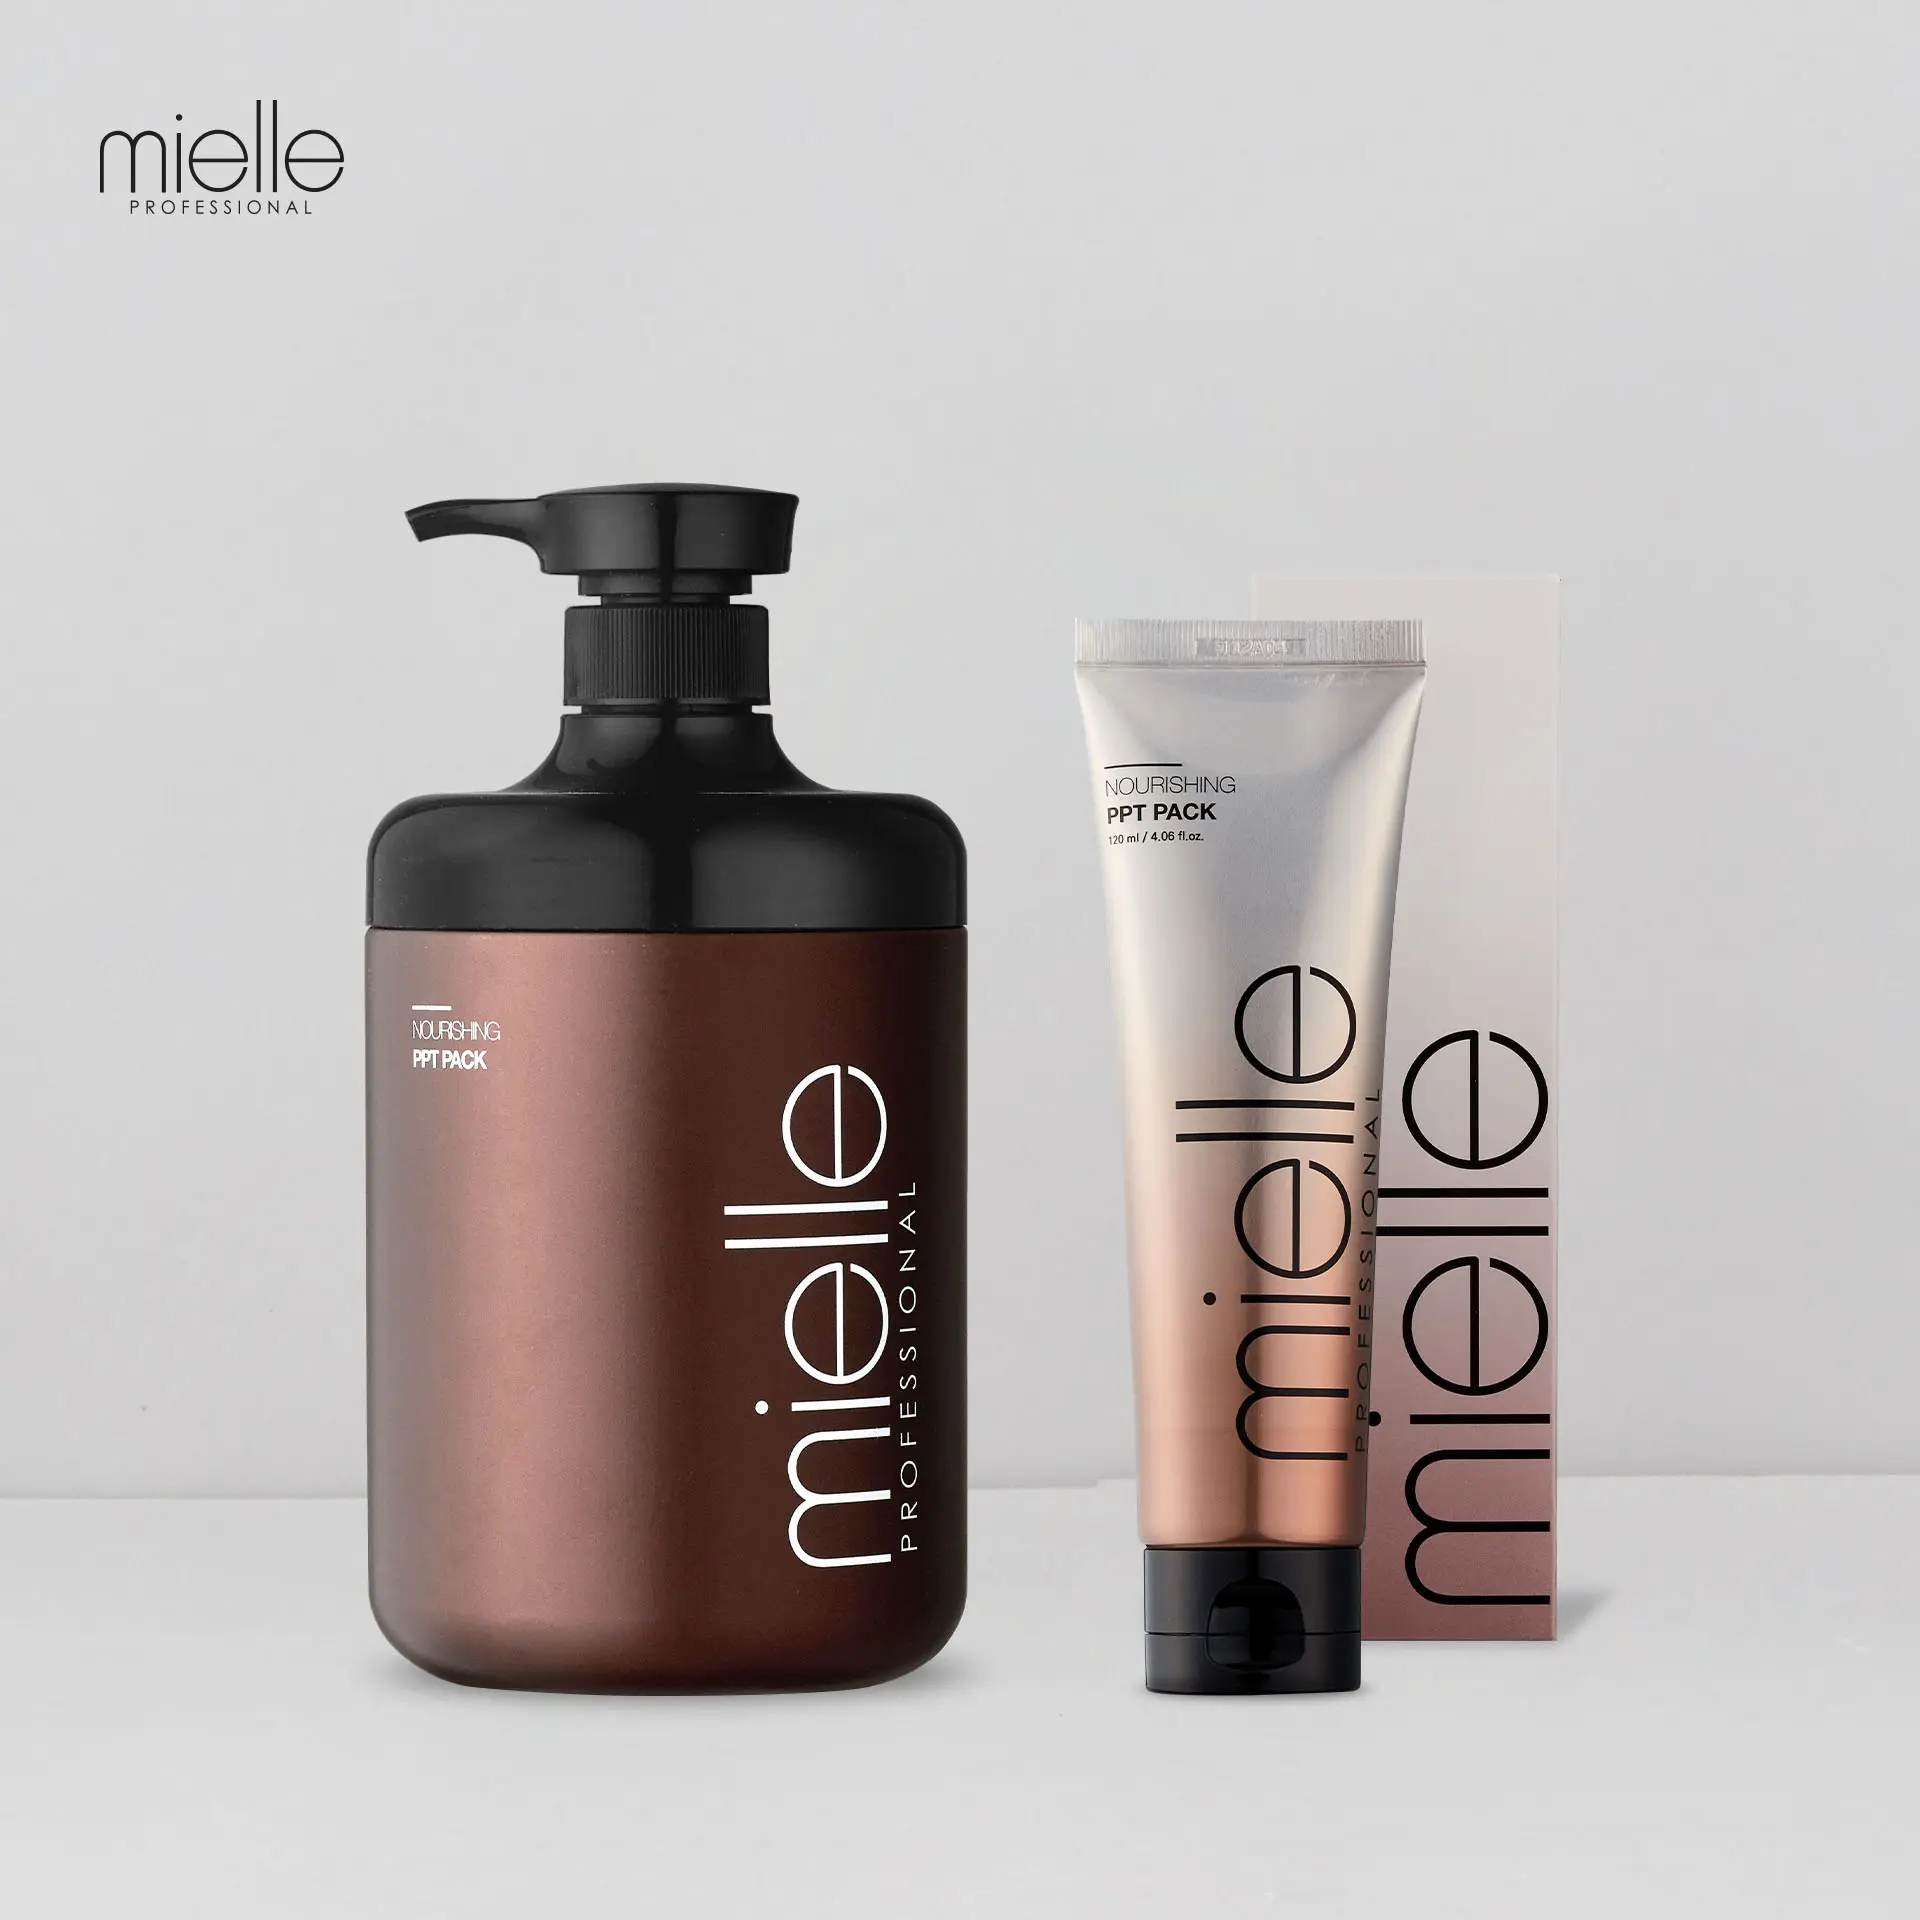 [mielle Professional - Korea] Nourishing PPT Pack 1,000ml 120ml Made in Korea Authentic Professional Hair Treatment